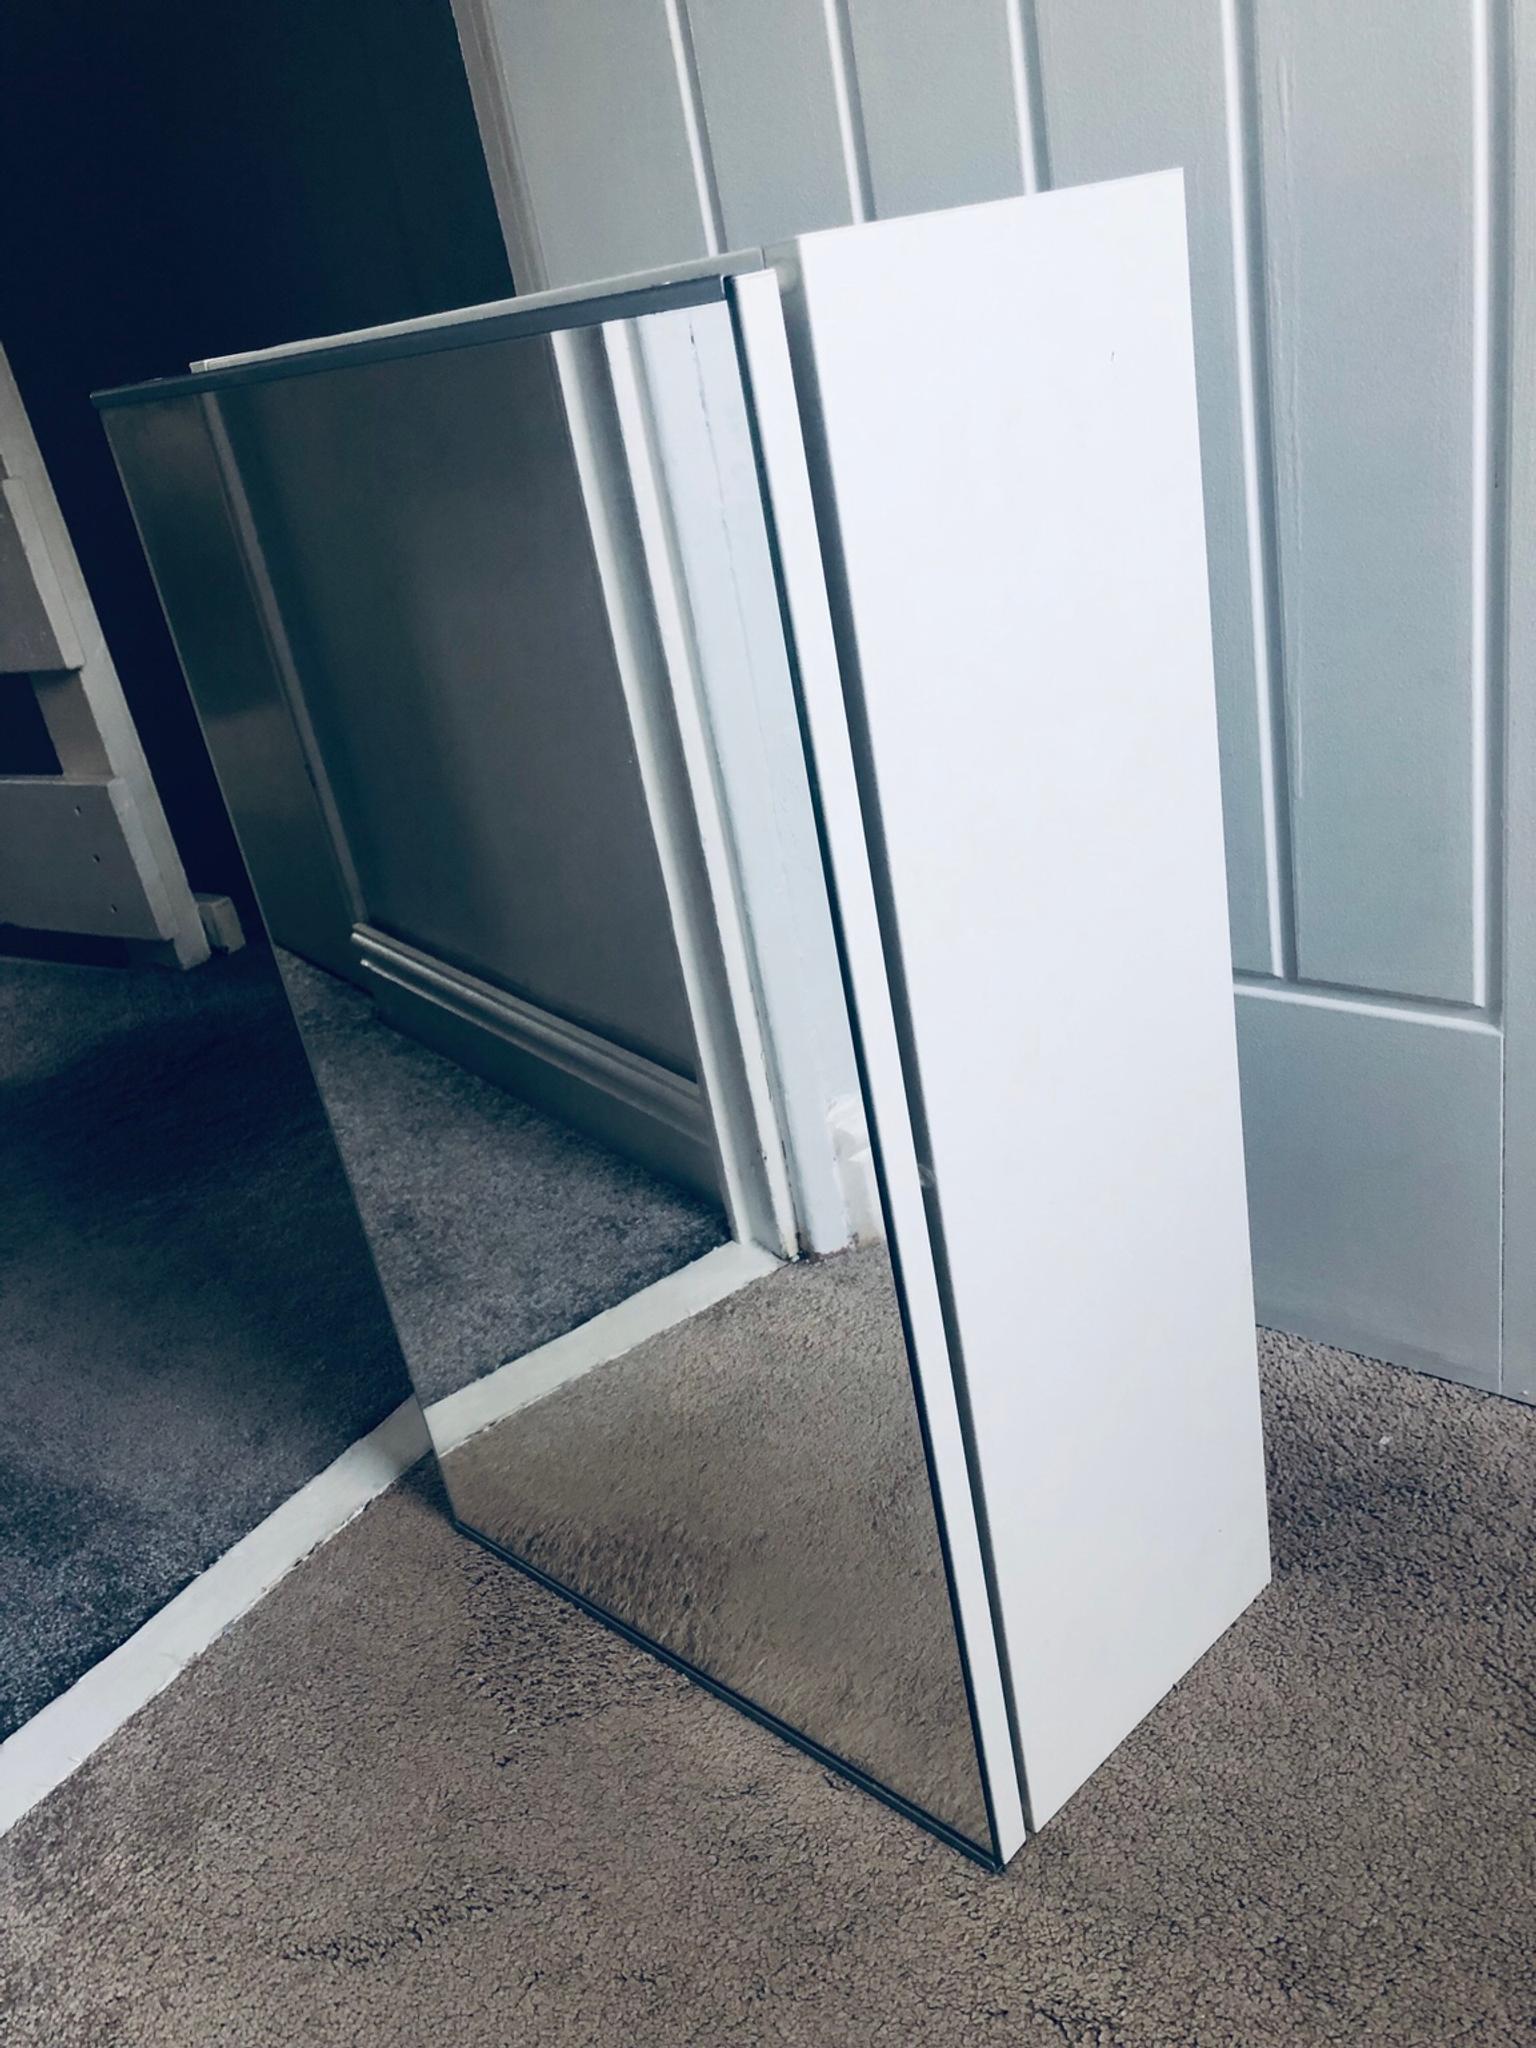 Mirrored Bathroom Cabinet In B77 Tamworth For 25 00 For Sale Shpock